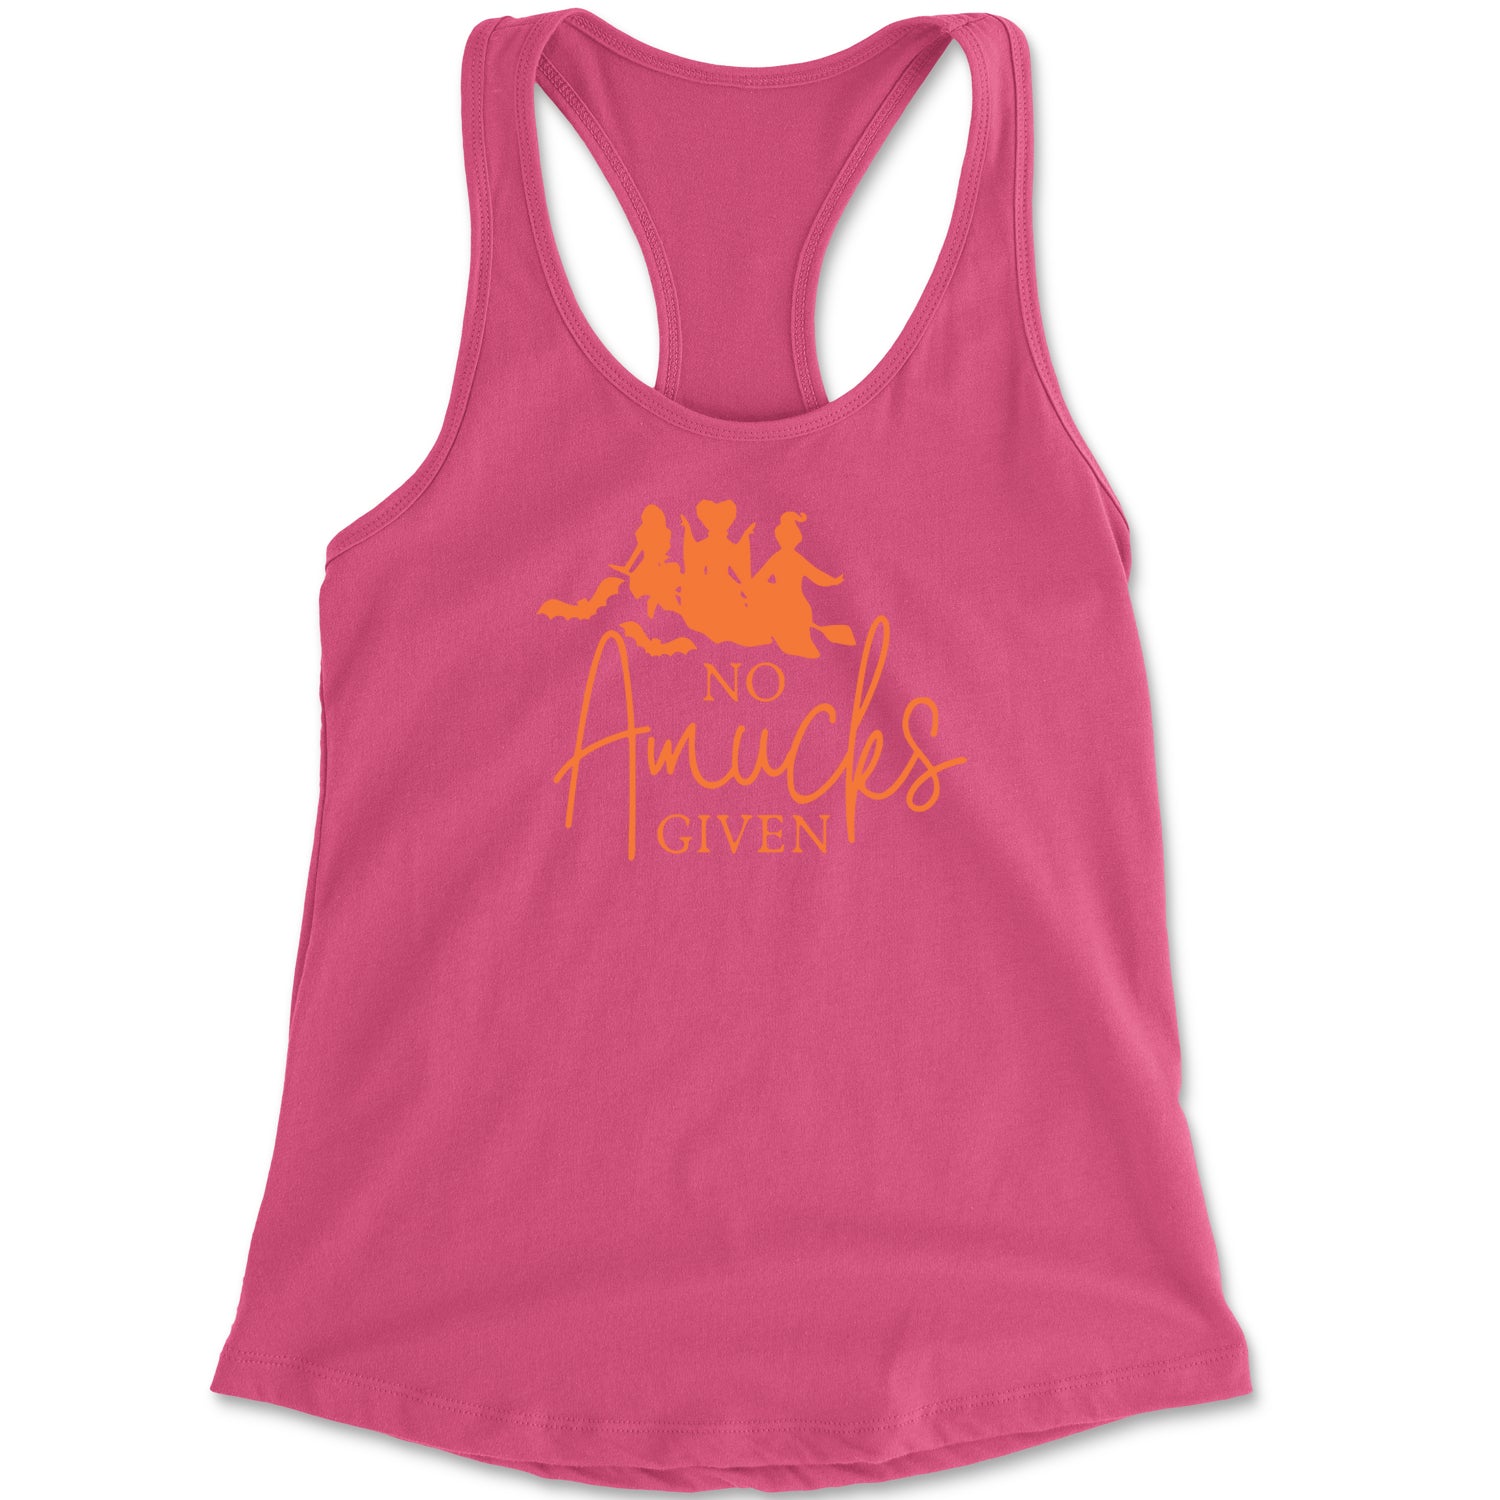 No Amucks Given Hocus Pocus Racerback Tank Top for Women descendants, enchanted, eve, hallows, hocus, or, pocus, sanderson, sisters, treat, trick, witches by Expression Tees